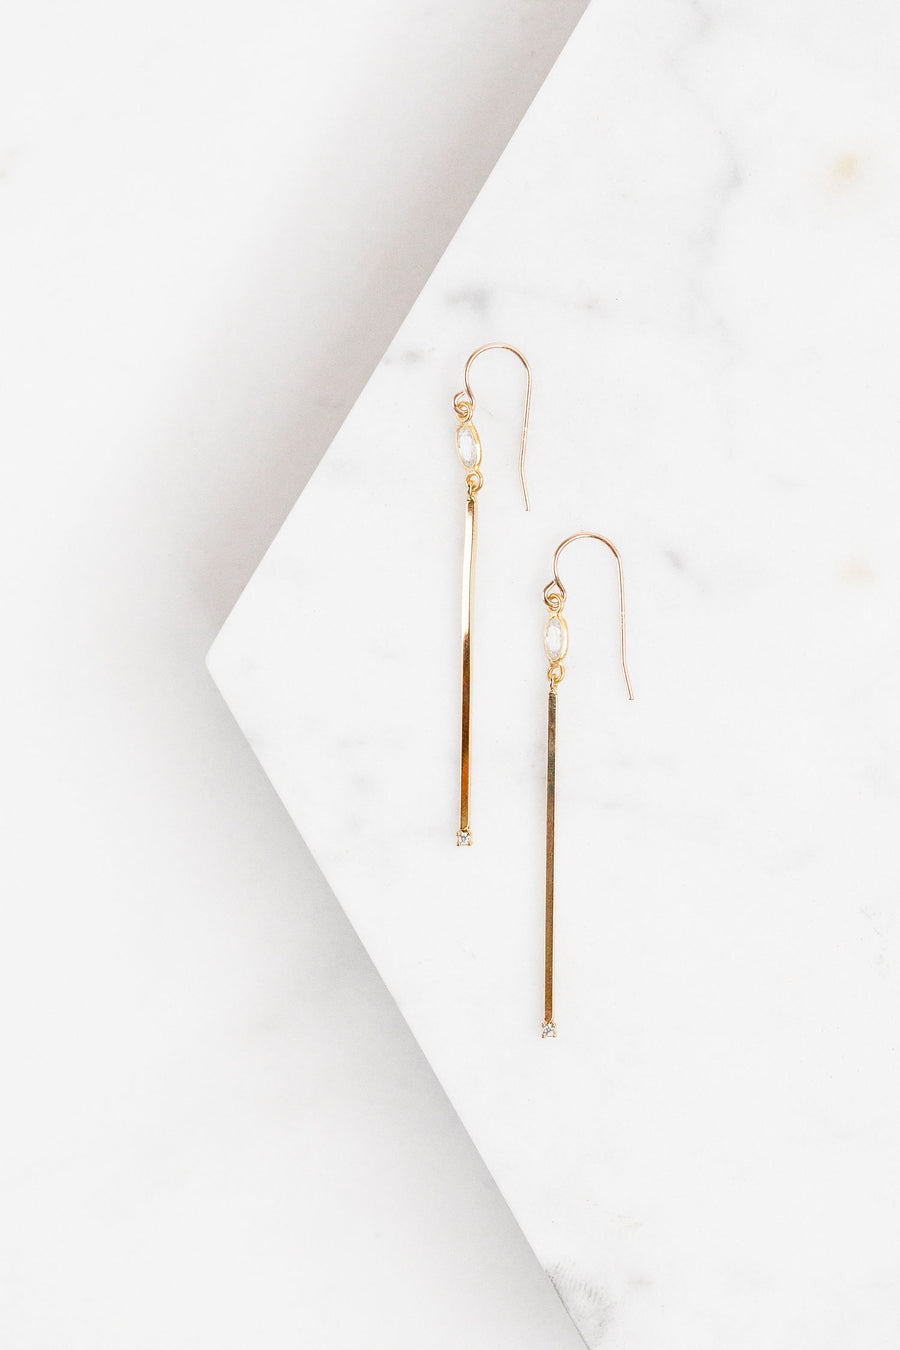 Find the perfect pair of earrings you're looking for from Charme Silkiner! These gold and CZ bezel drop earrings are stunning with their narrow bar and CZ accents. Perfect to dress or dress down any outfit the Vanna Earrings are the perfect must have for everyone!